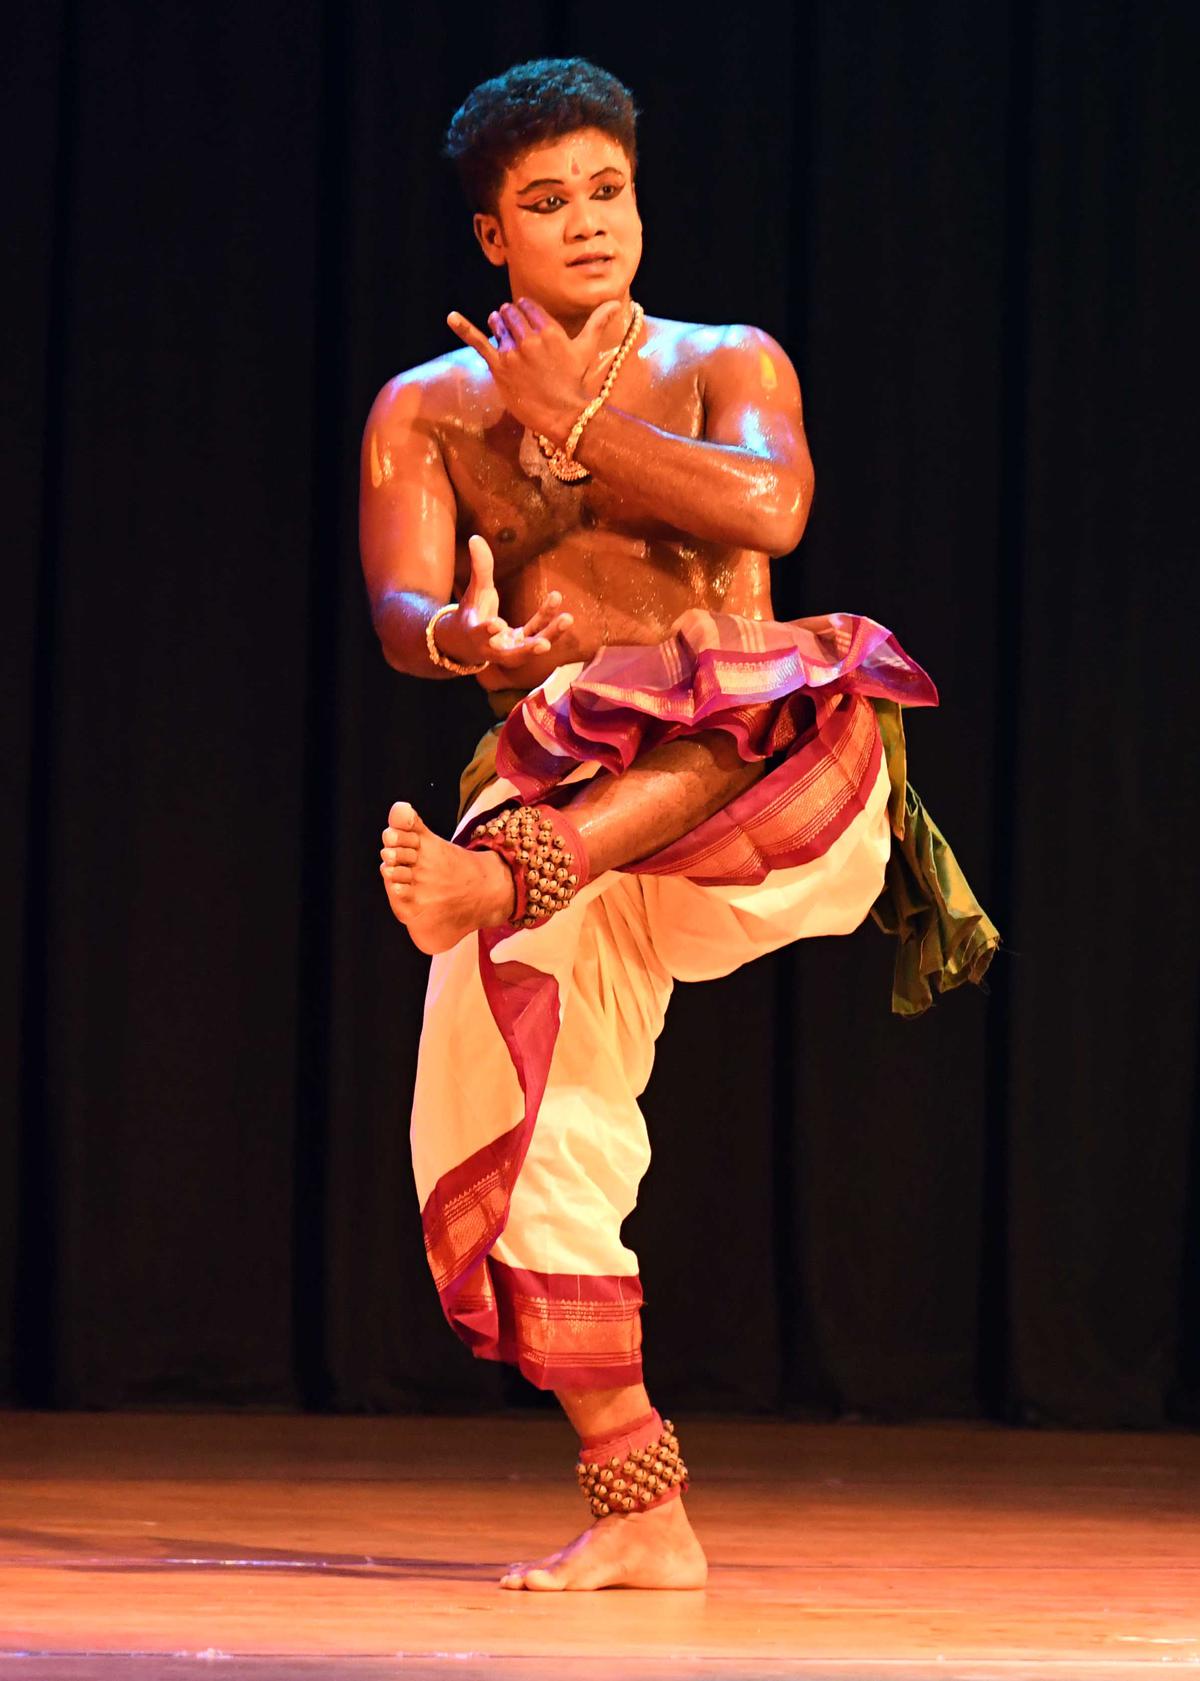 Bharatanatyam performance by Kaliveerapathiran at The Music Academy's Dance Festival on 04 January 2023. 